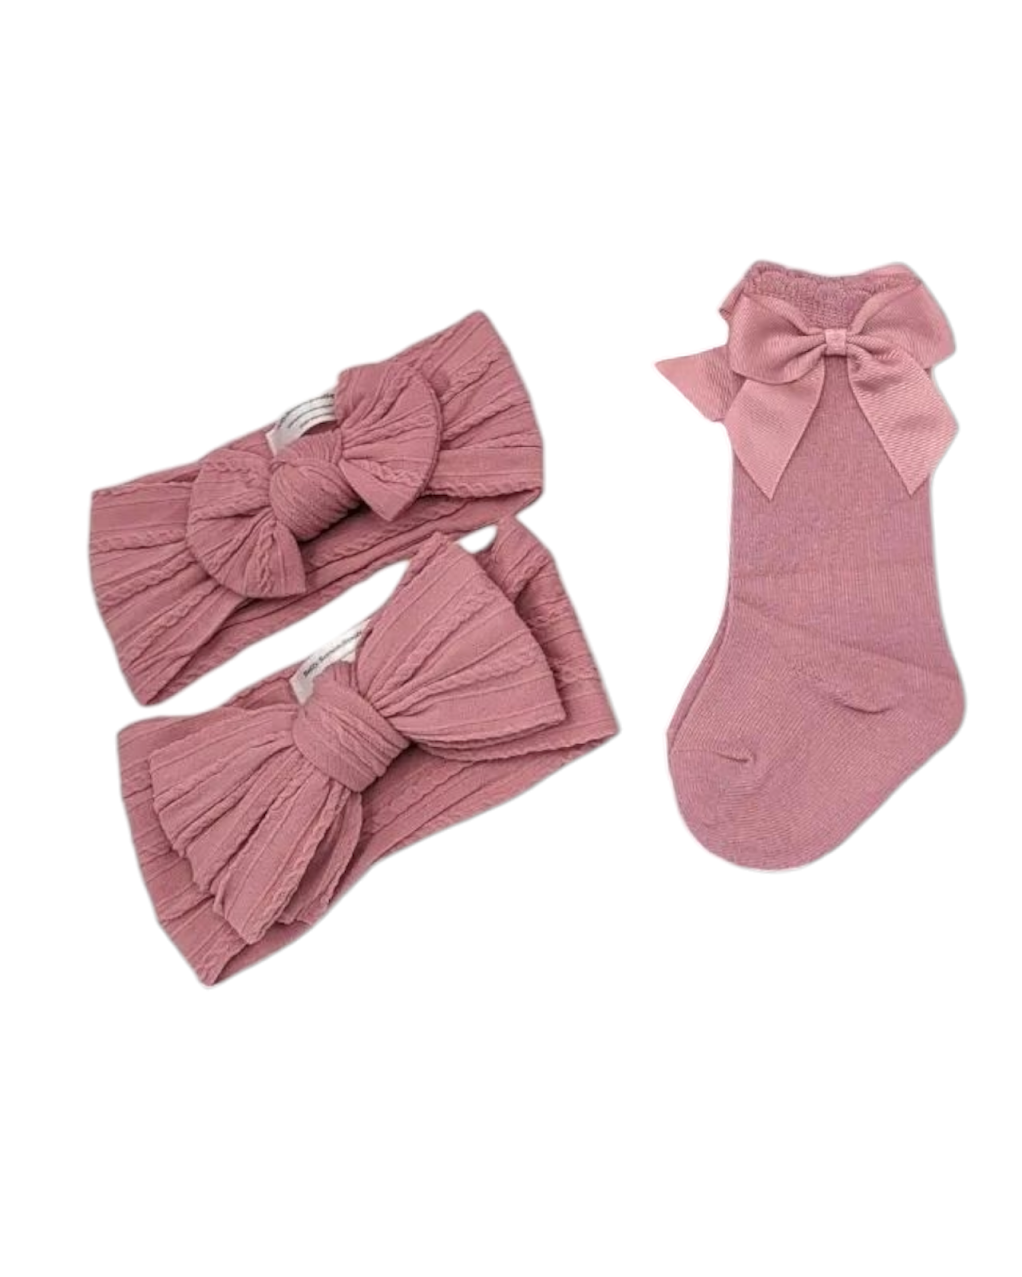 Our Light Berry Larger, Smaller Headwrap & Knee High Socks Set - Betty Brown Boutique Ltd